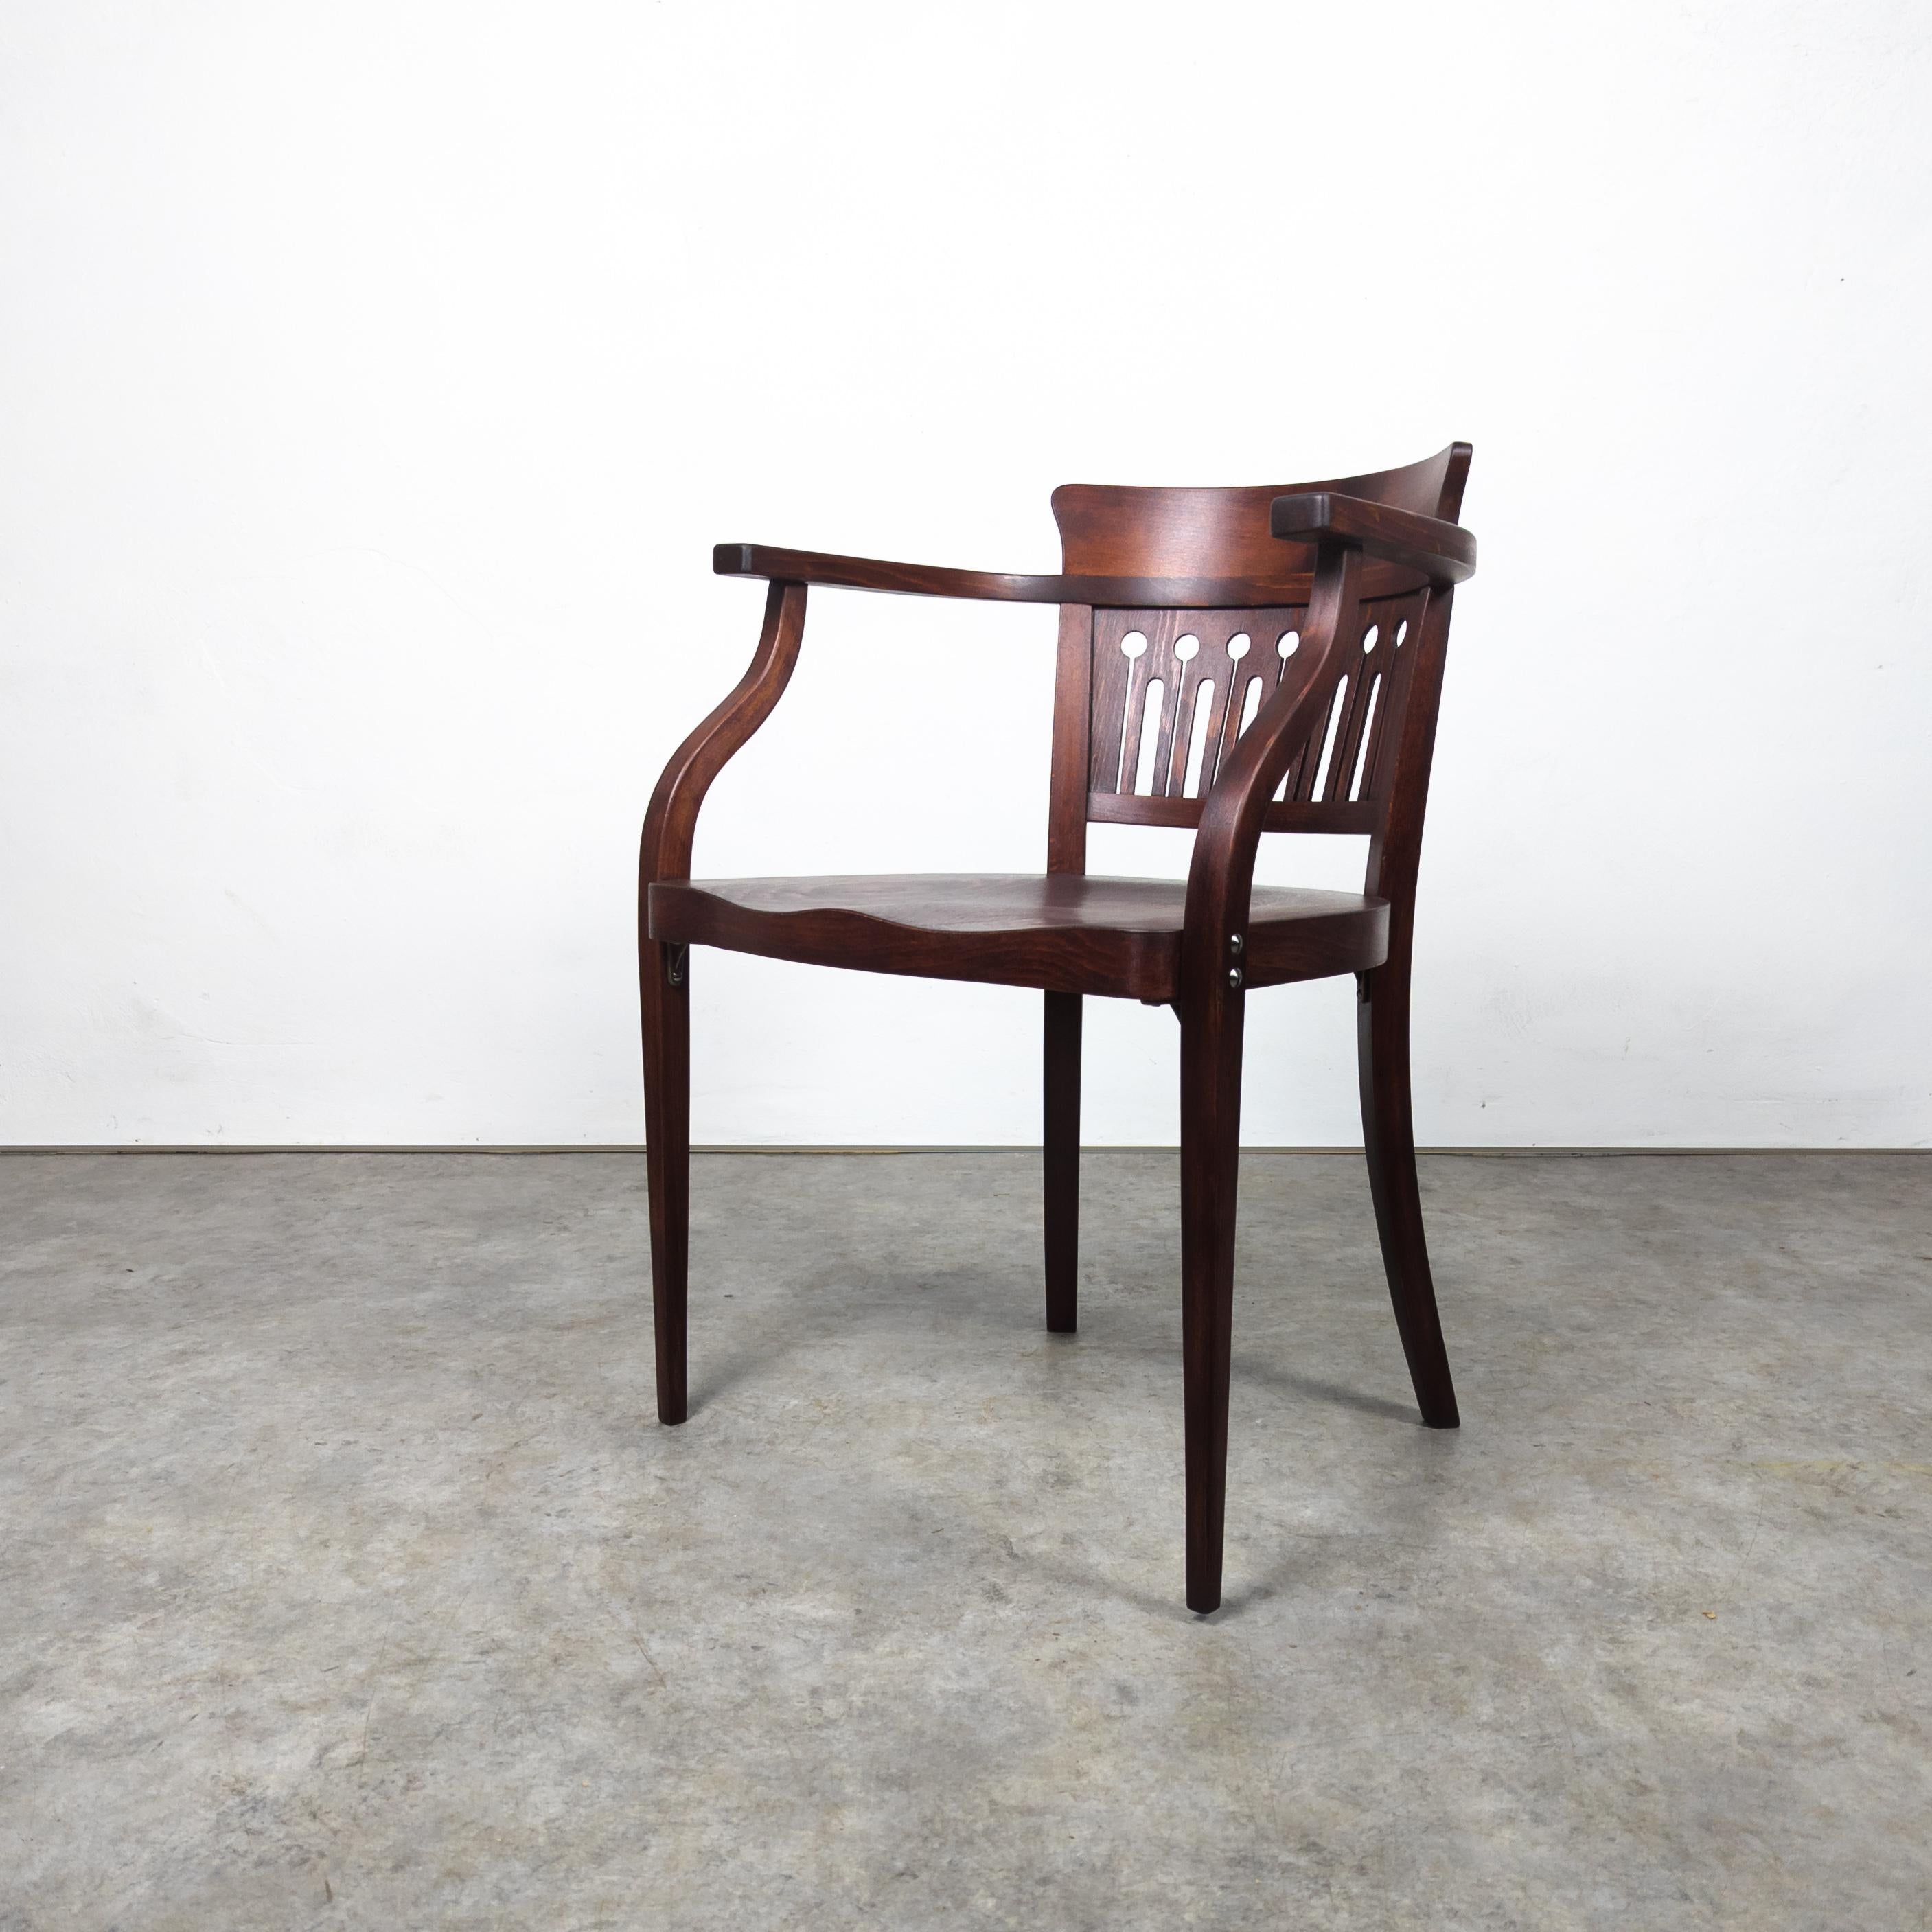 Art Nouveau Thonet No. 6515 armchair by Otto Wagner